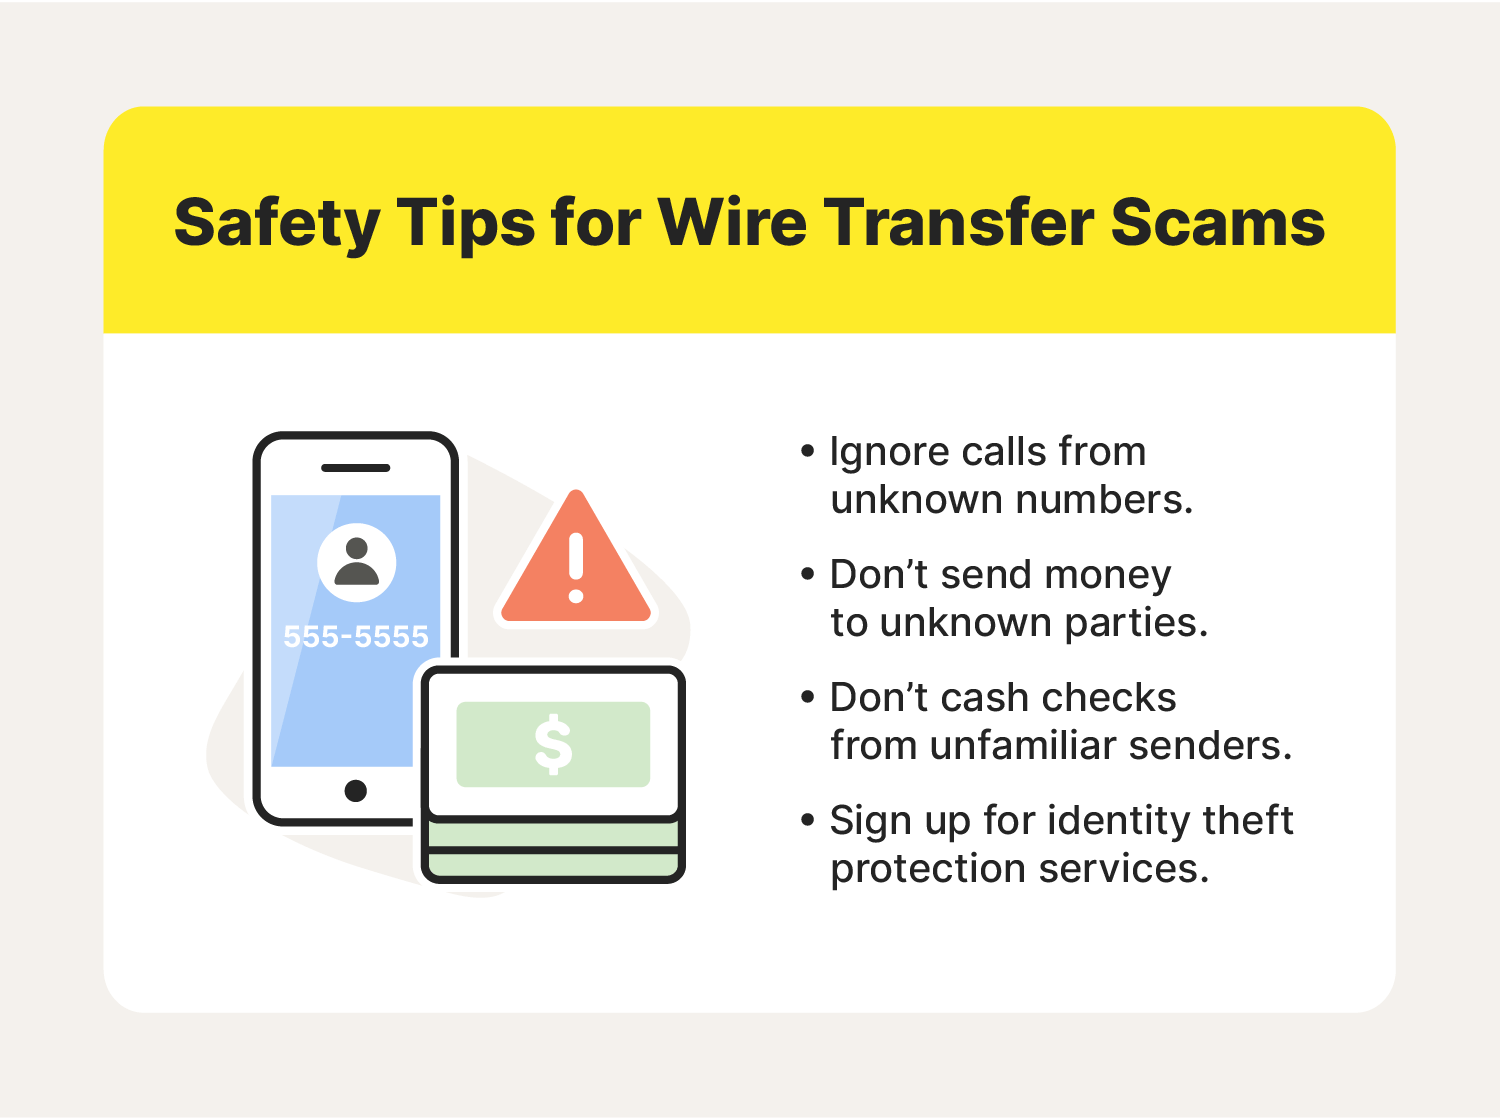 An image showcases safety tips for avoiding wire transfer scams.